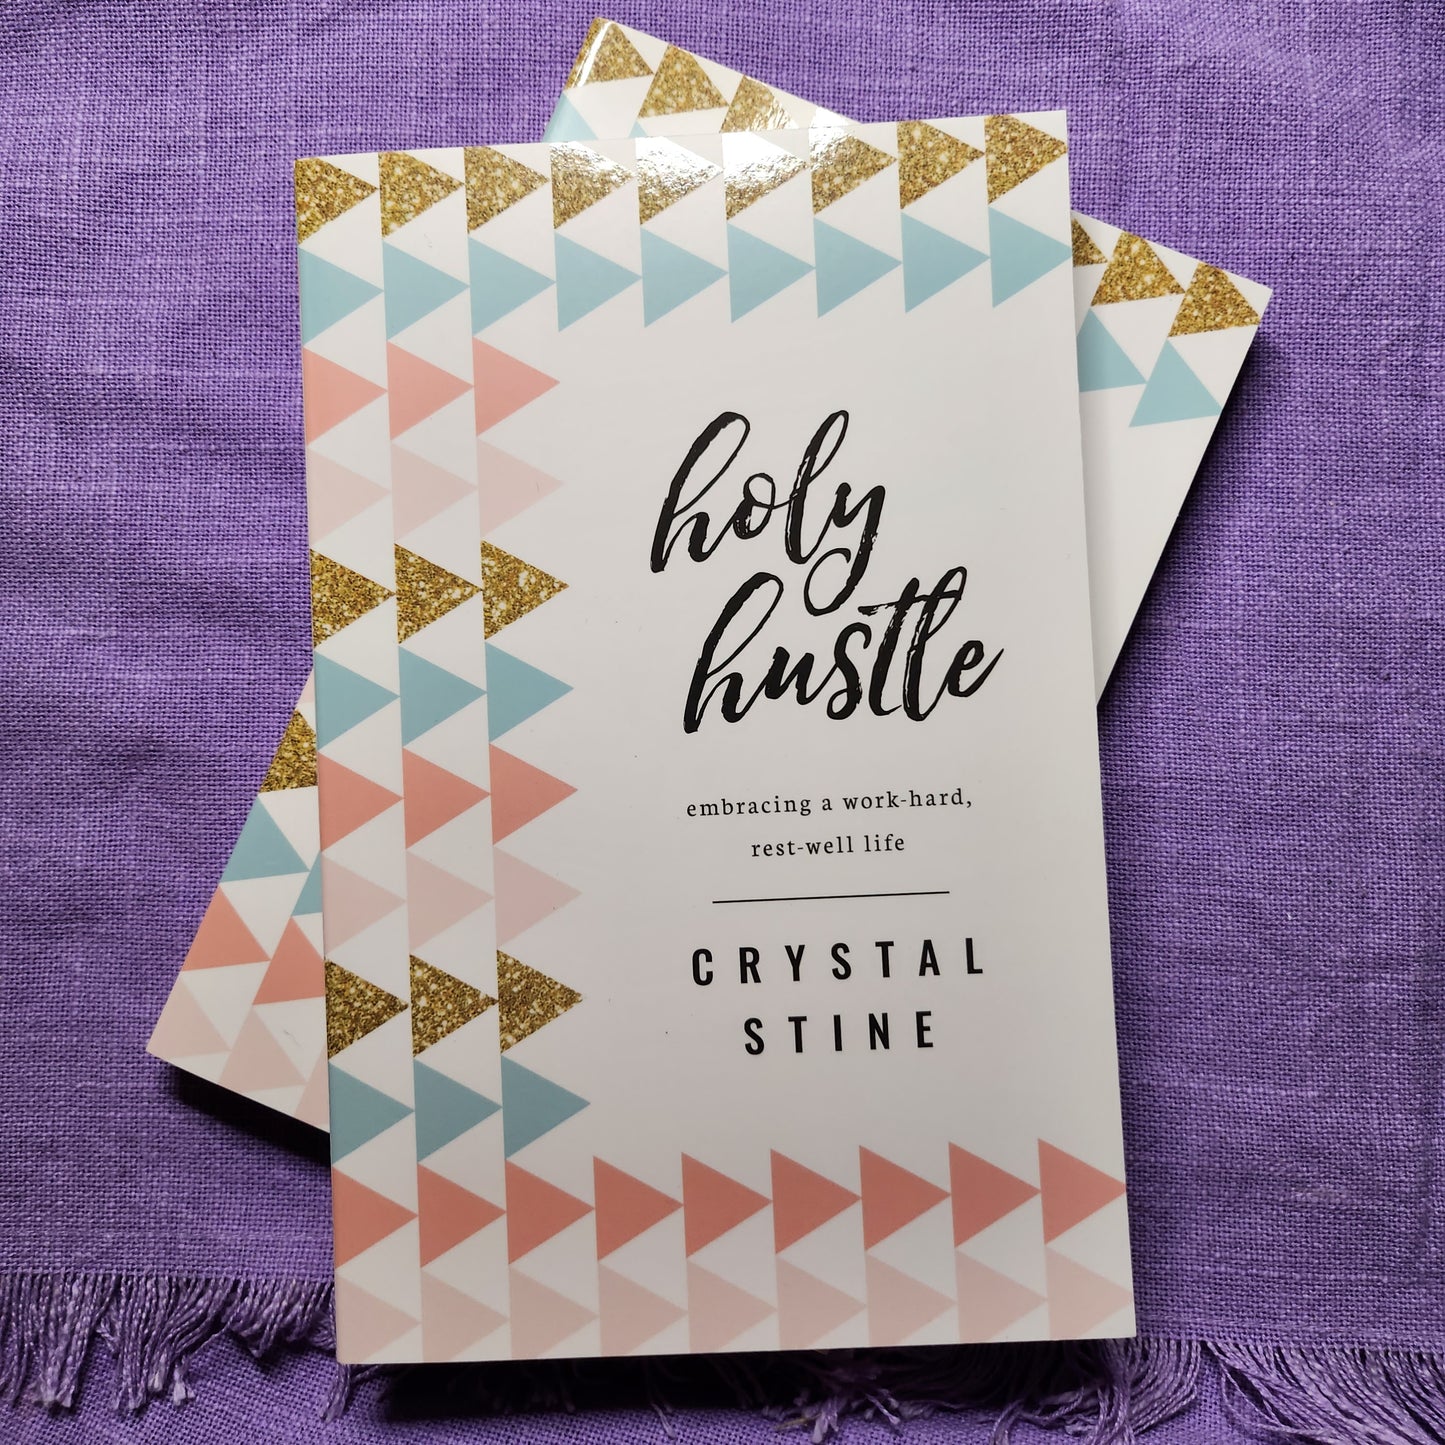 Holy Hustle: Embracing a Work-Hard, Rest-Well Life